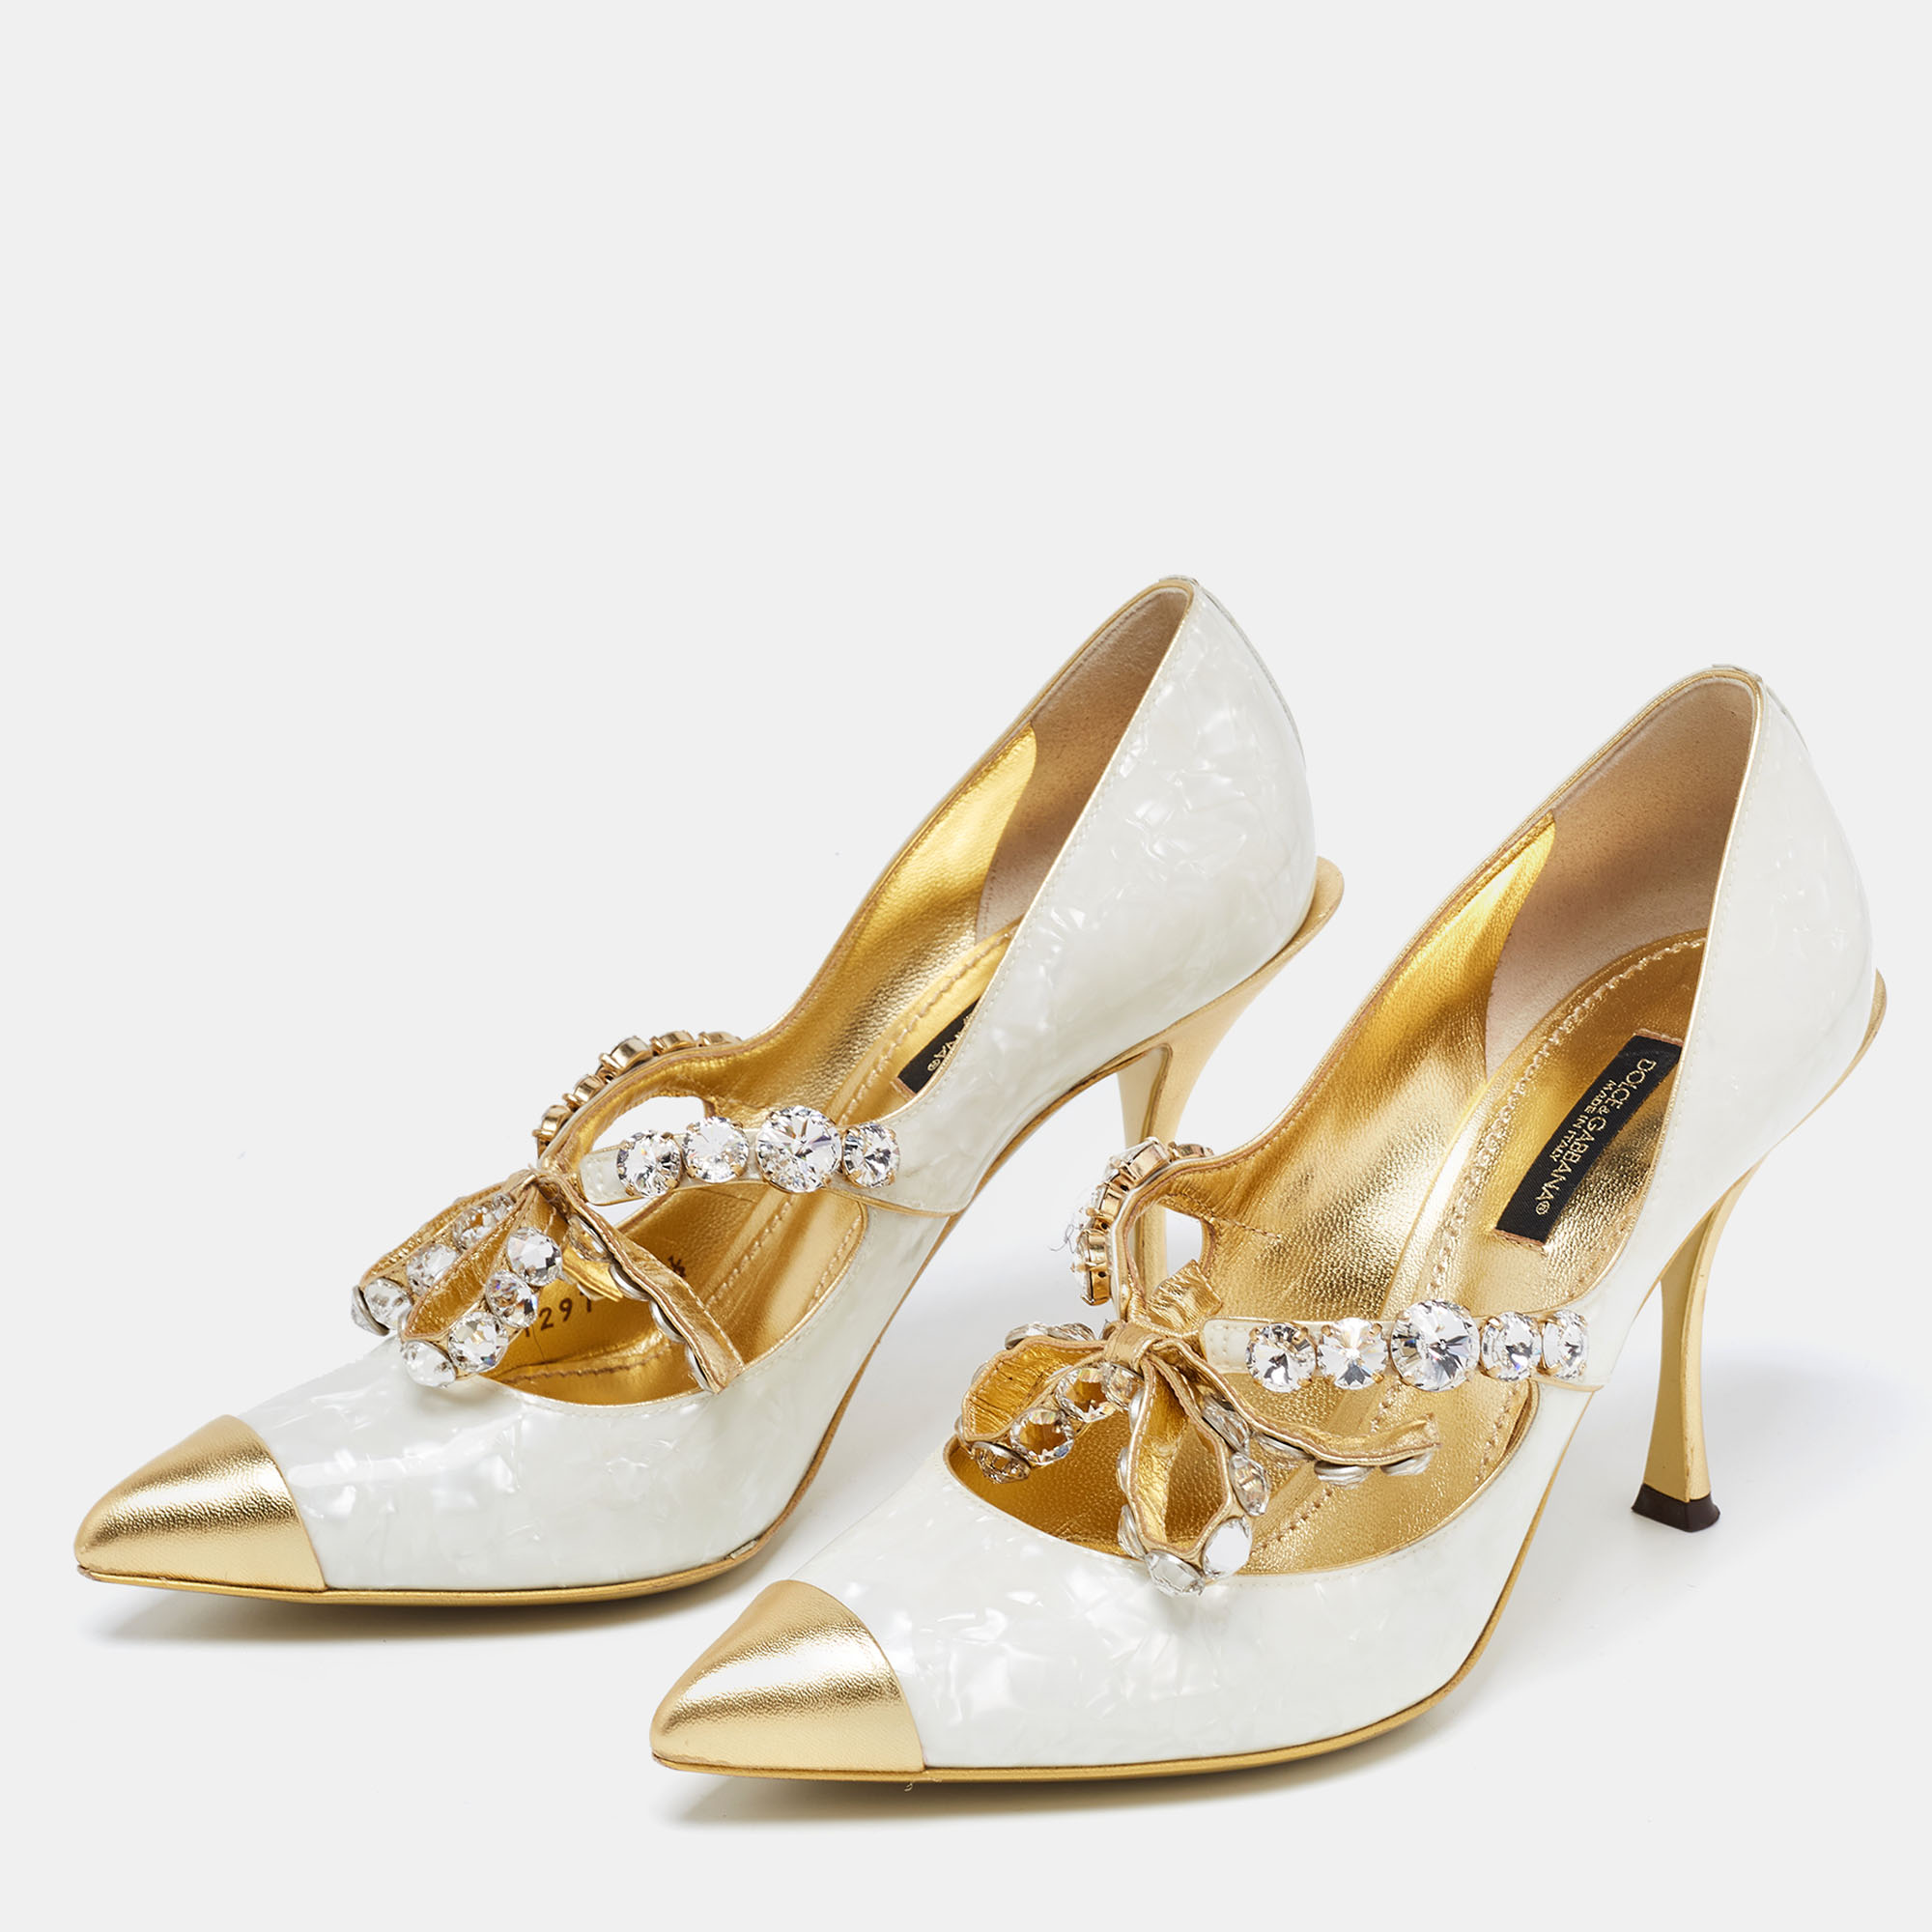 

Dolce & Gabbana Off-White/Gold Textured Leather Crystal Embellished Bow Lori Pumps Size